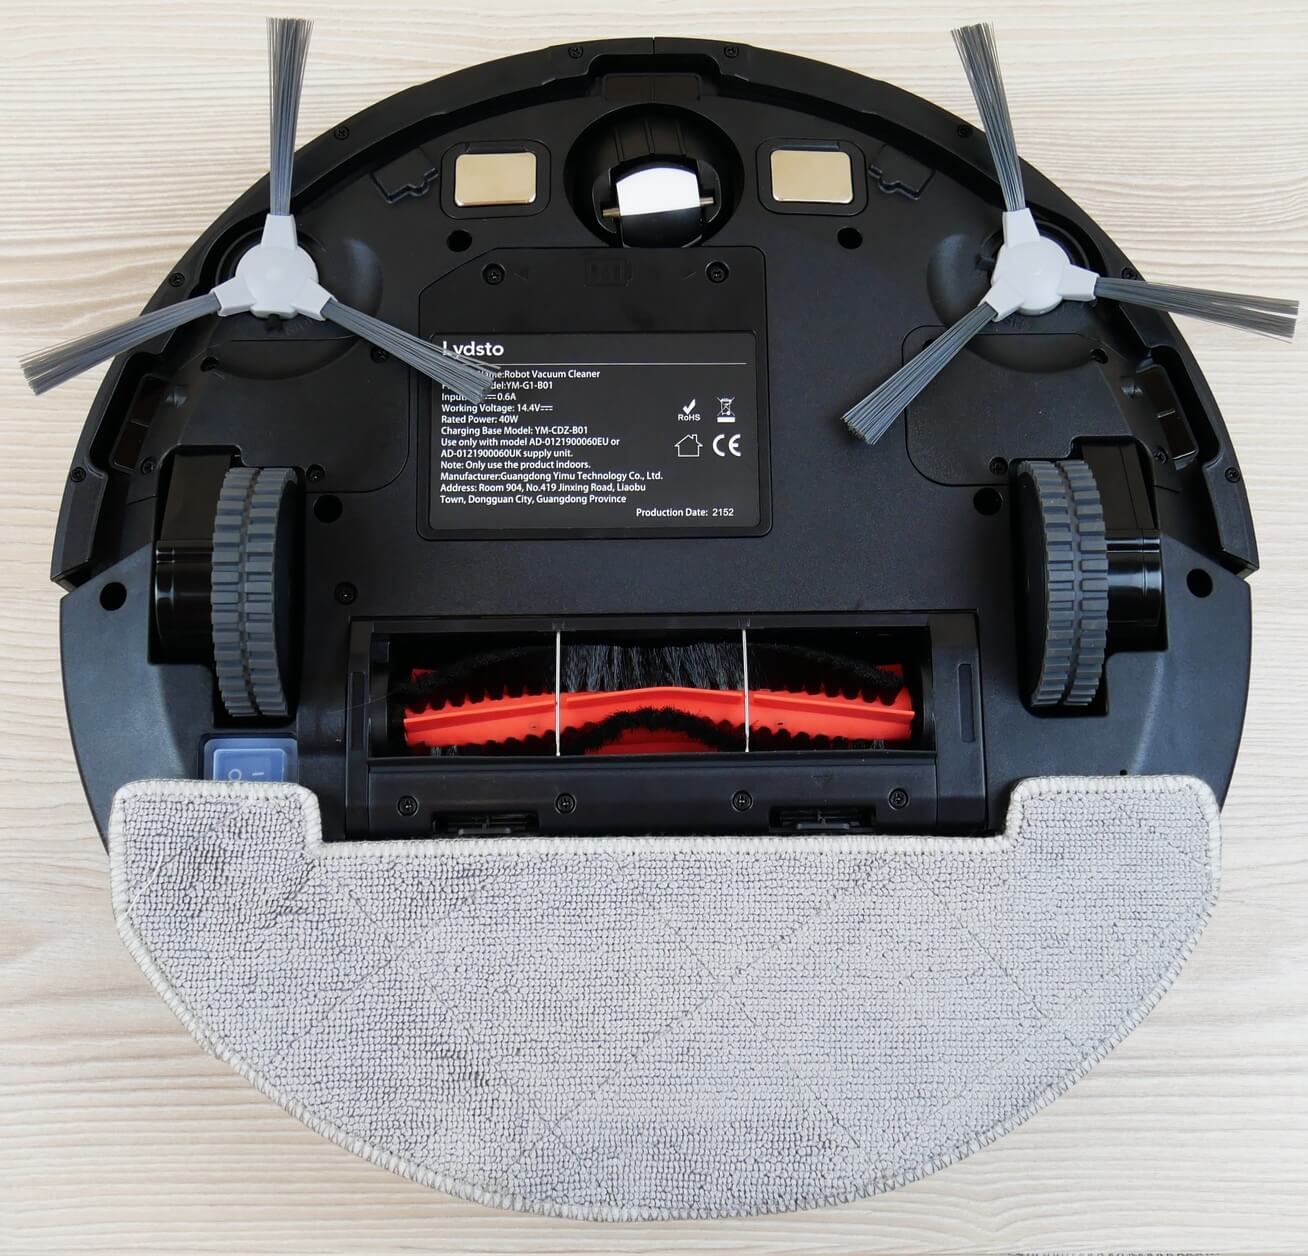 Xiaomi lydsto robot vacuum cleaner. Xiaomi lydsto g1. Робот-пылесос Xiaomi lydsto. Lydsto g1 робот пылесос. Робот-пылесос Xiaomi lydsto g1 Black.